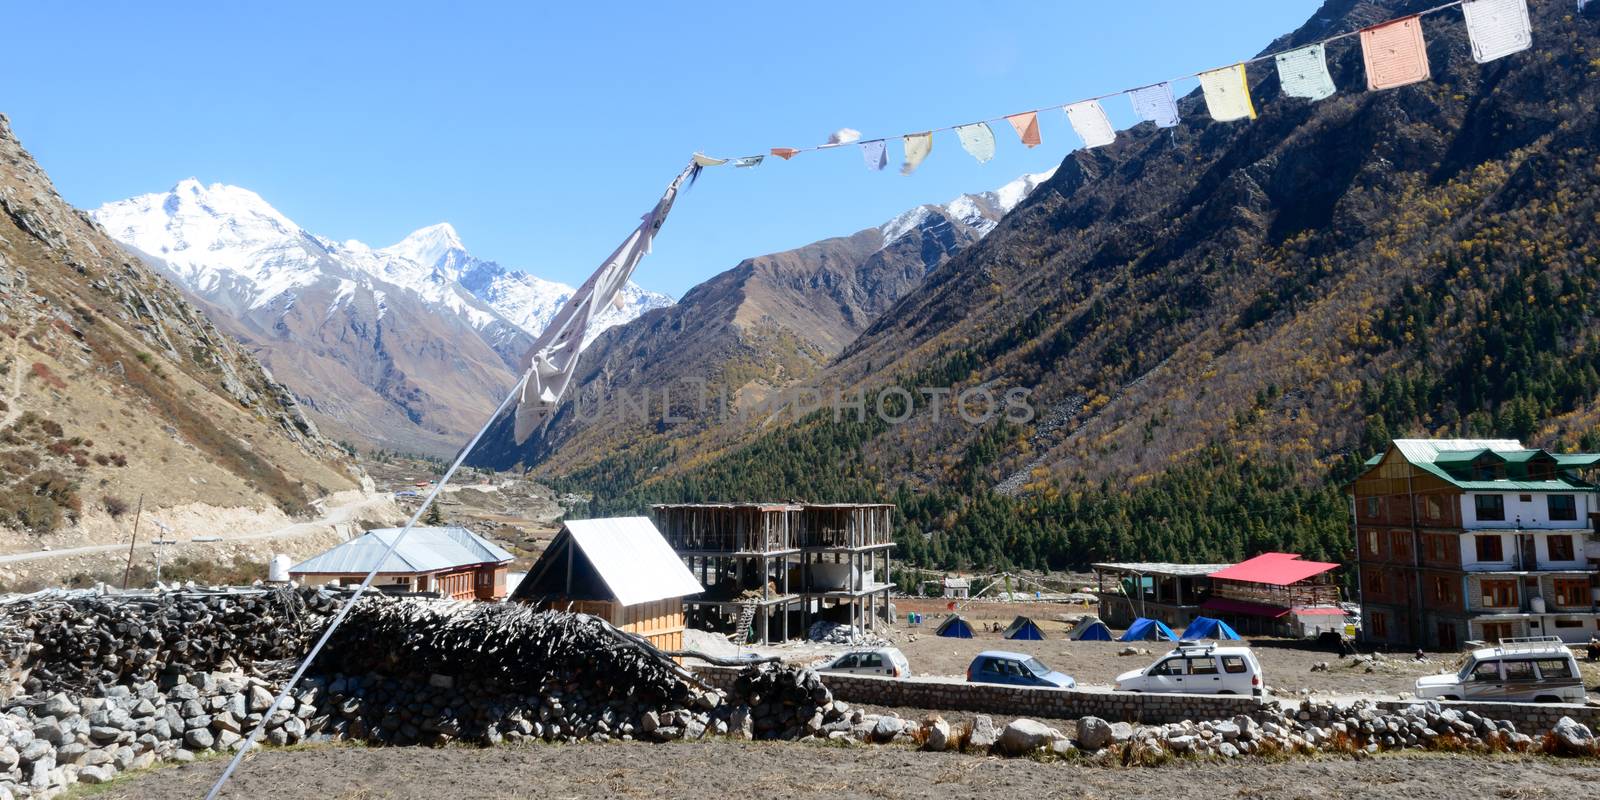 Chitkul india May 2019 - Scenic view of India’s last village. Whole terrain is surrounded by Himalayan Kailash mountain range, apple orchards, wooden houses, army ITBP barracks and Ranikanda meadows. by sudiptabhowmick